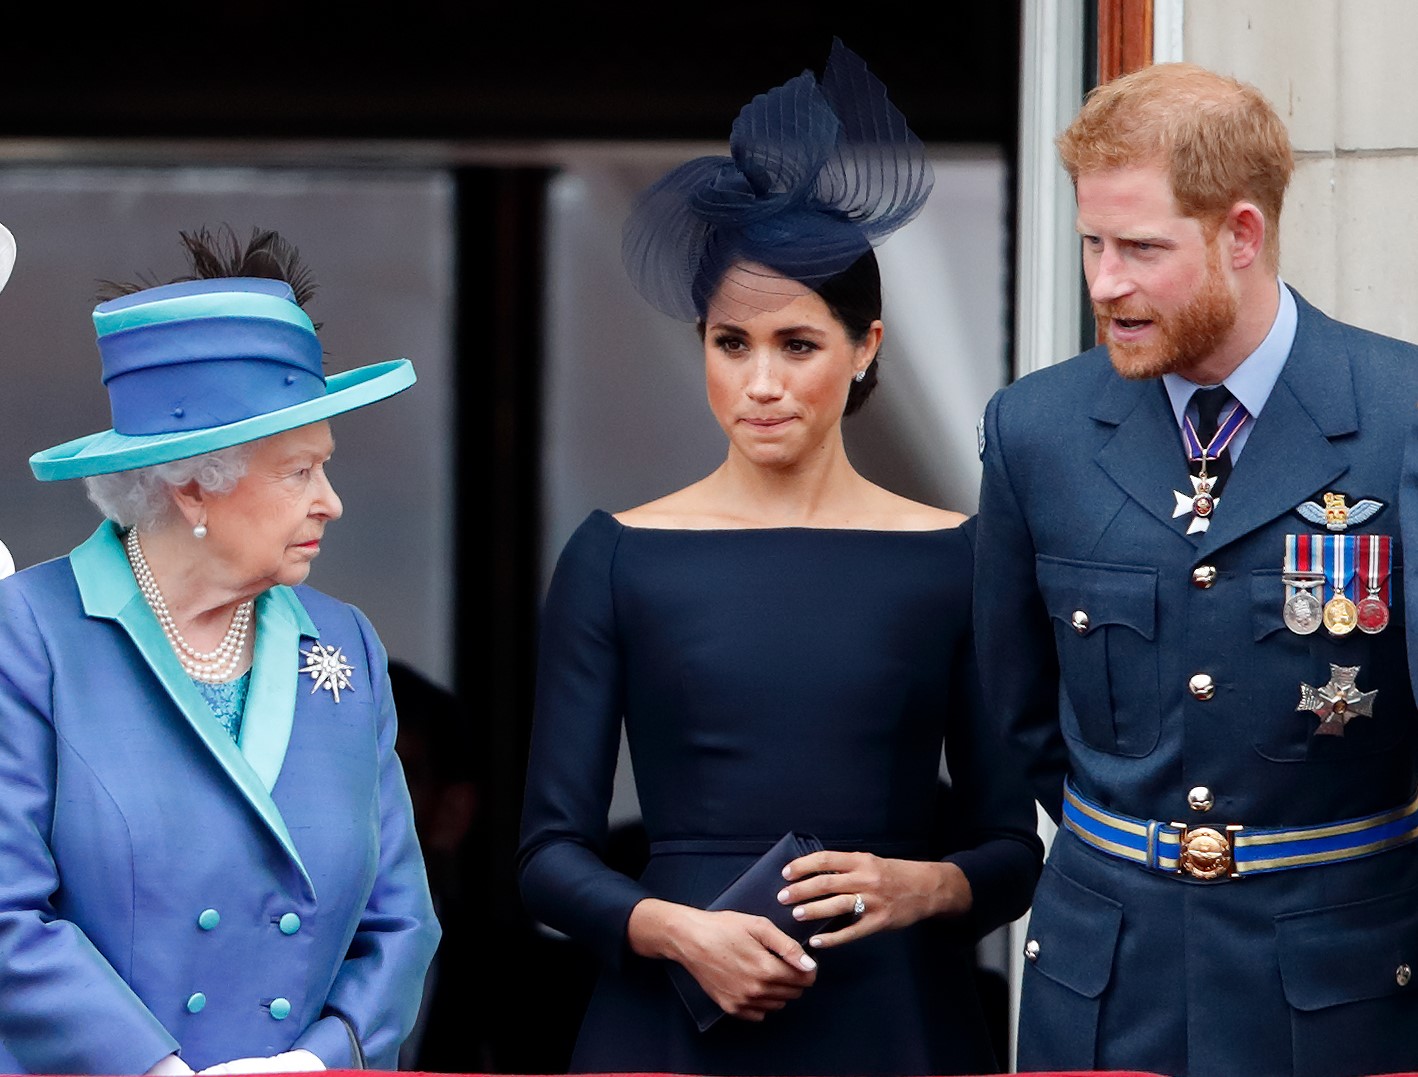 (L to R) Queen Elizabeth II, Meghan Markle, and Prince Harry